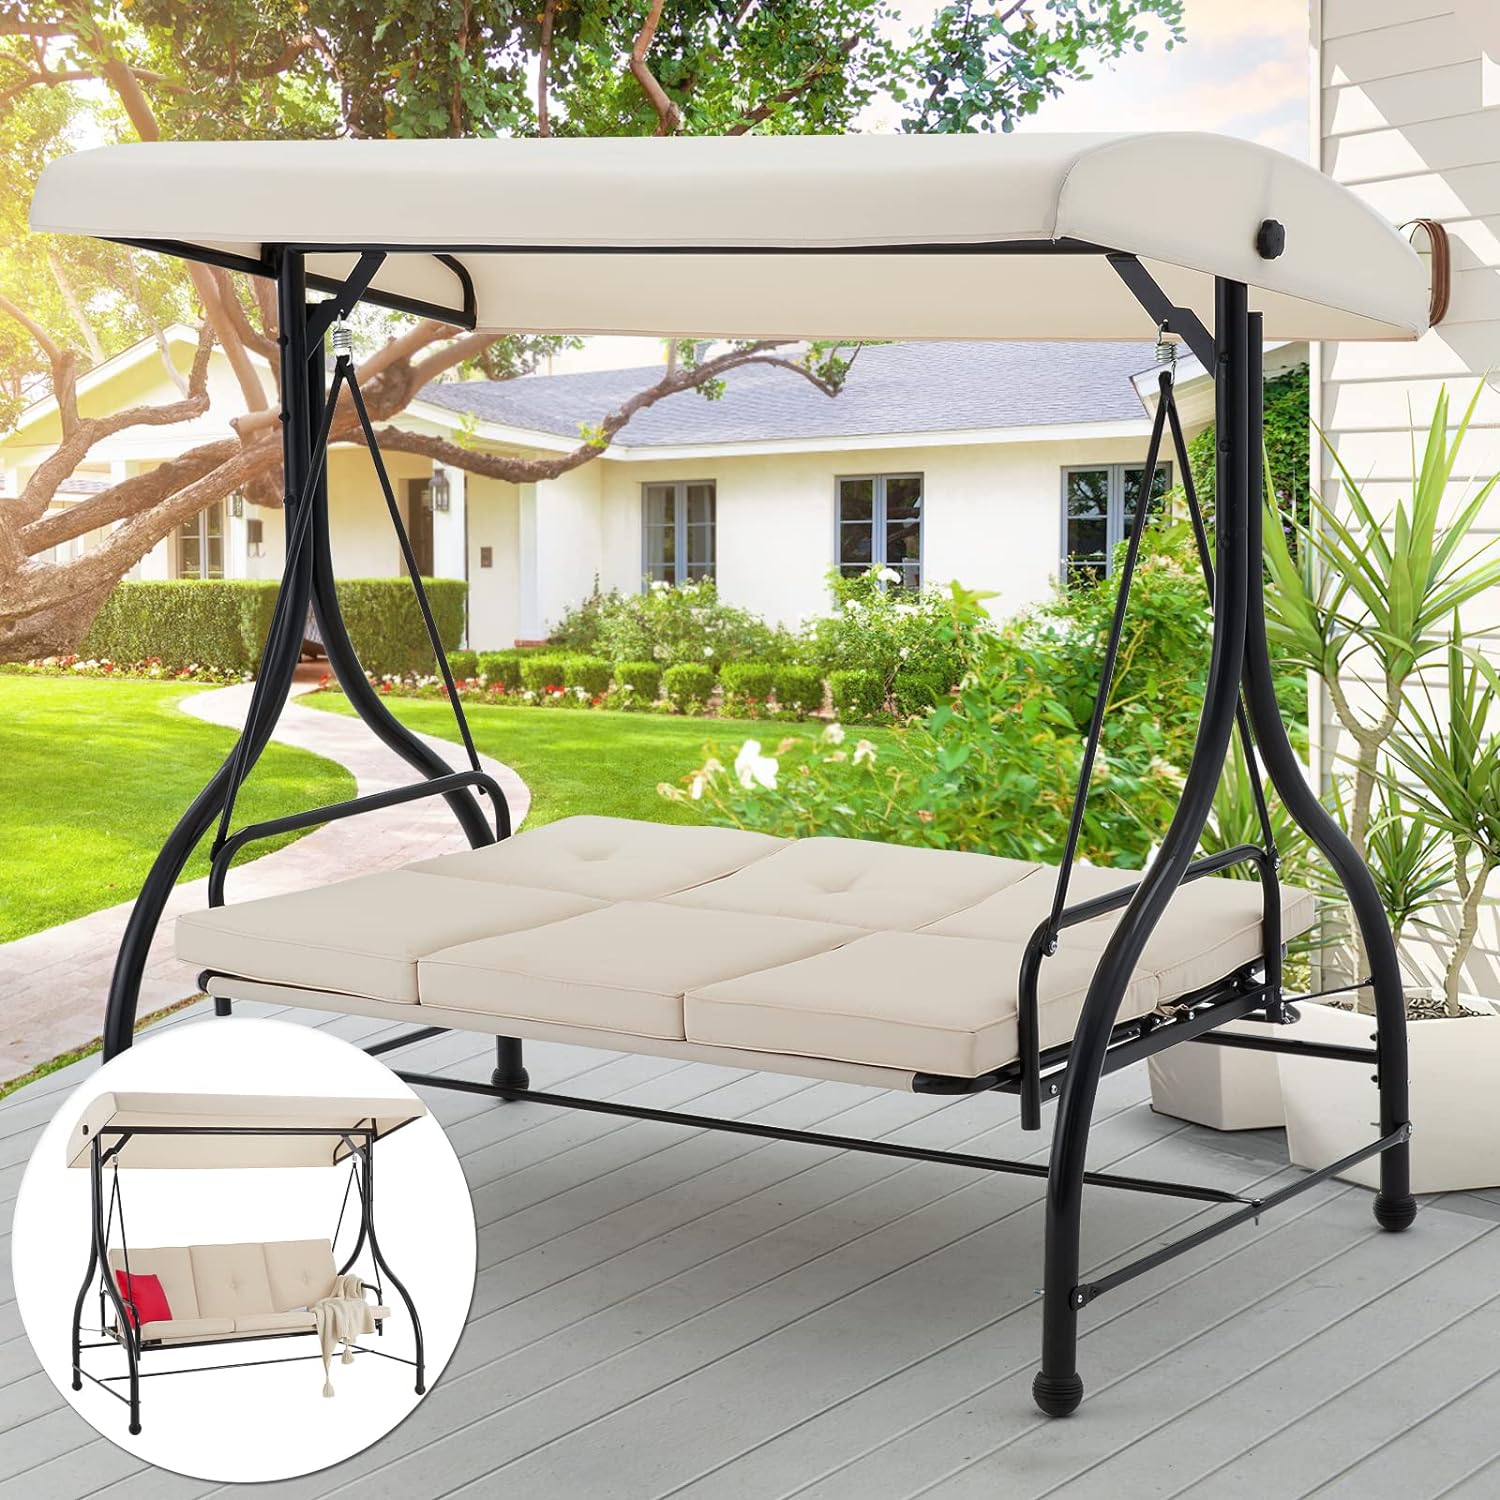 AECOJOY 3-Seat Outdoor Patio Swing Chair, Converting Swing Glider Canopy Hammock w/Adjustable Backrest and Canopy, Removable Cushions for Porch, Backyard, Poolside, Beige